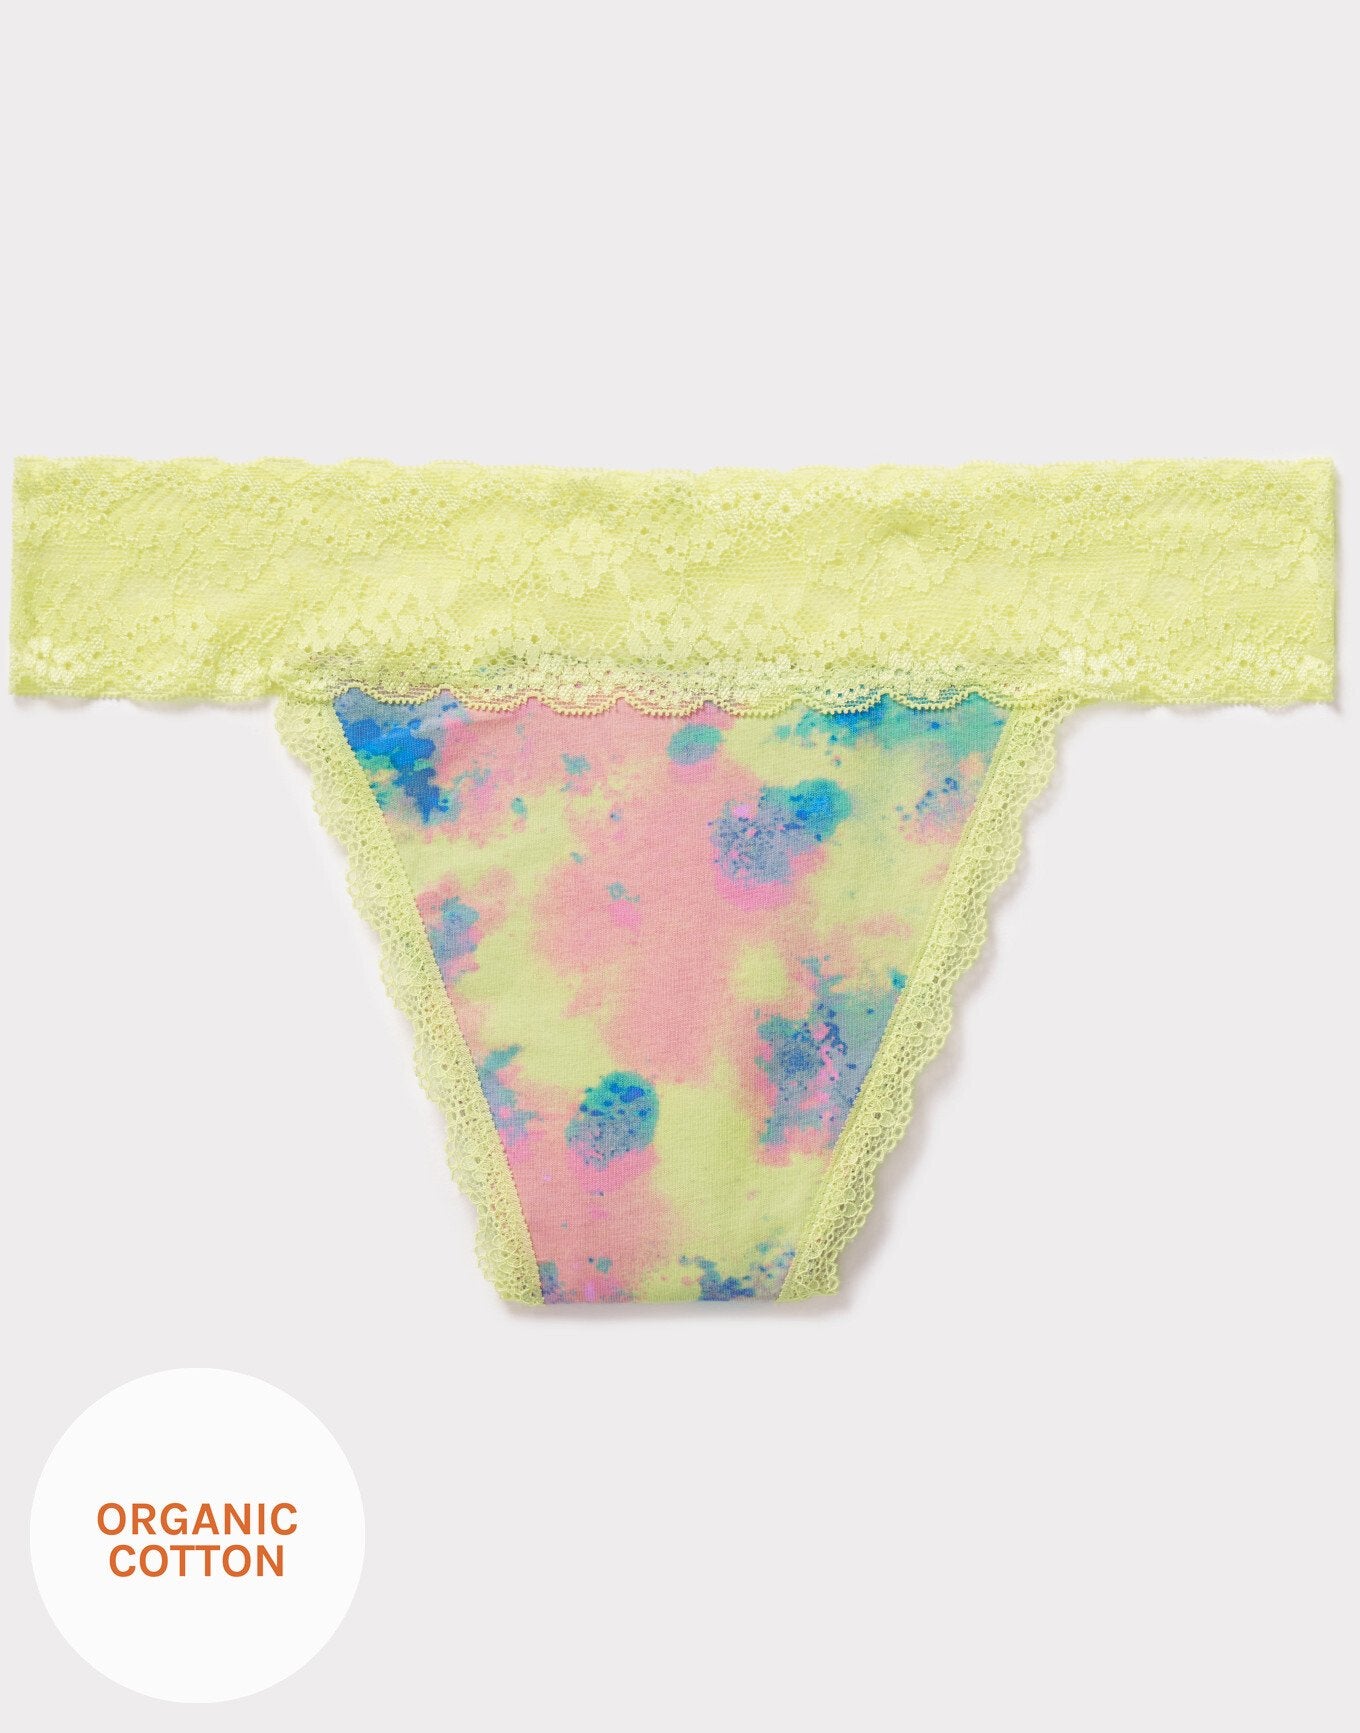 Joyja Lily period-proof panty in color Melted Tie Dye C02 and shape thong